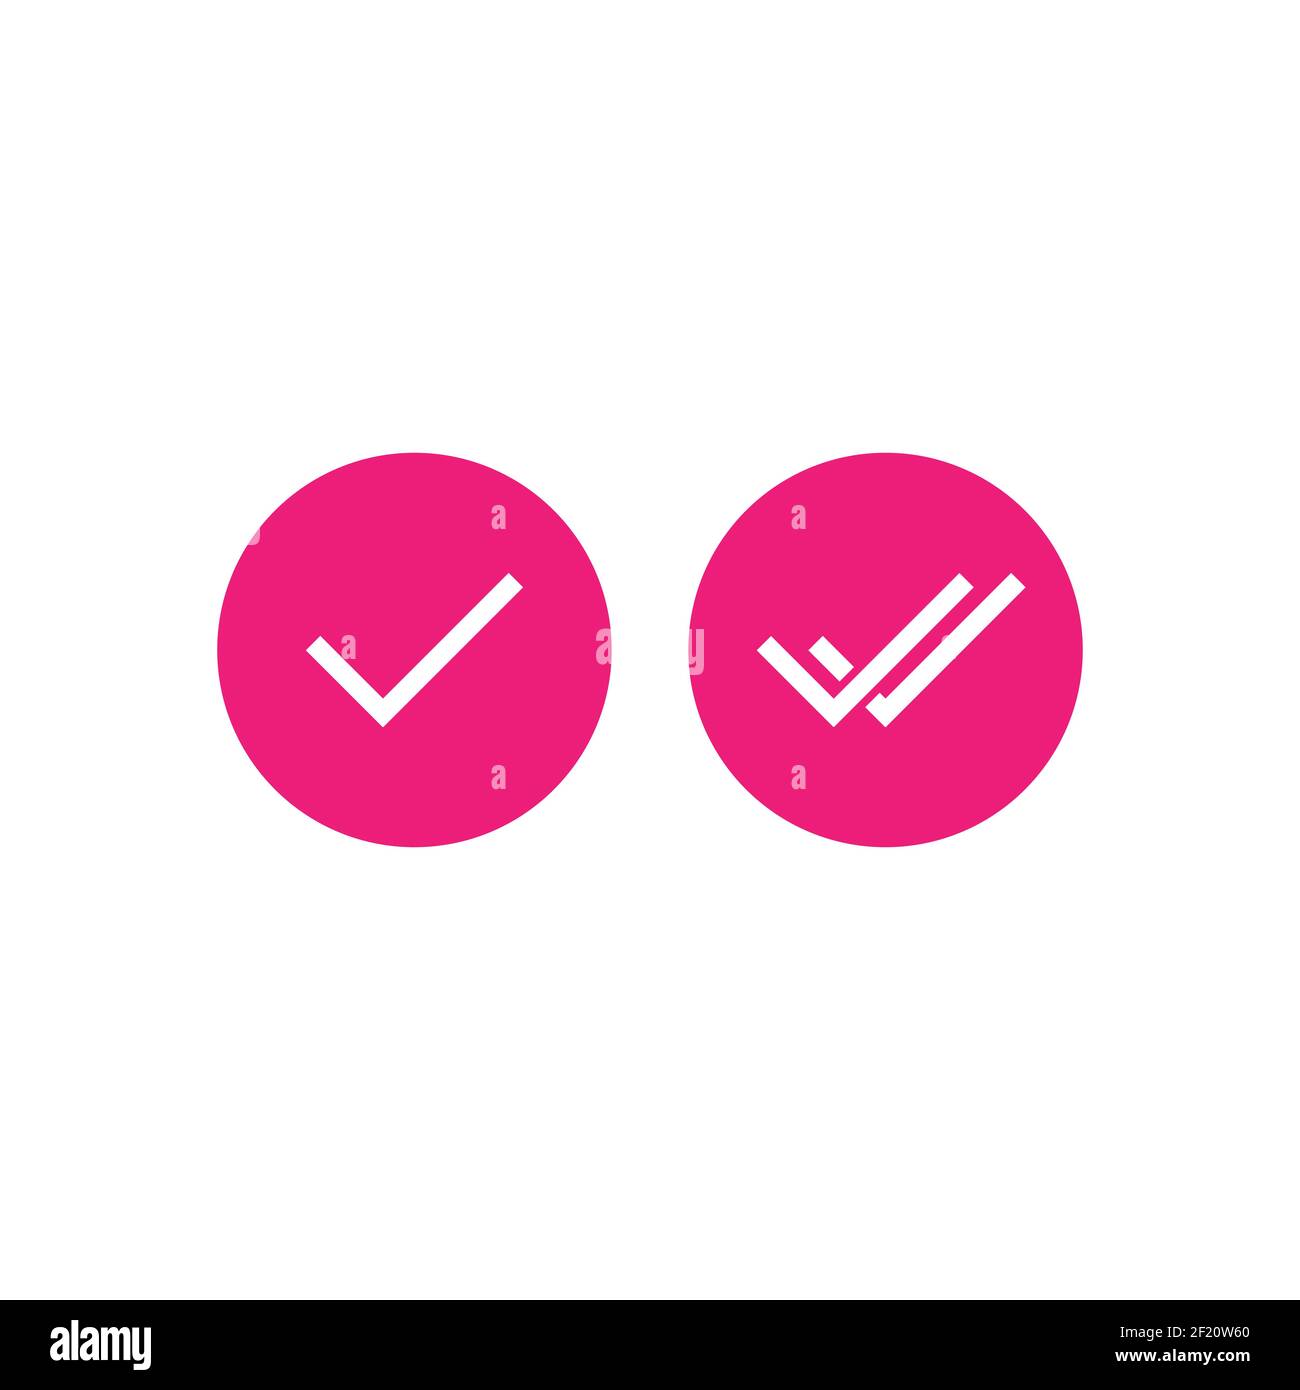 Double check - Free signaling icons